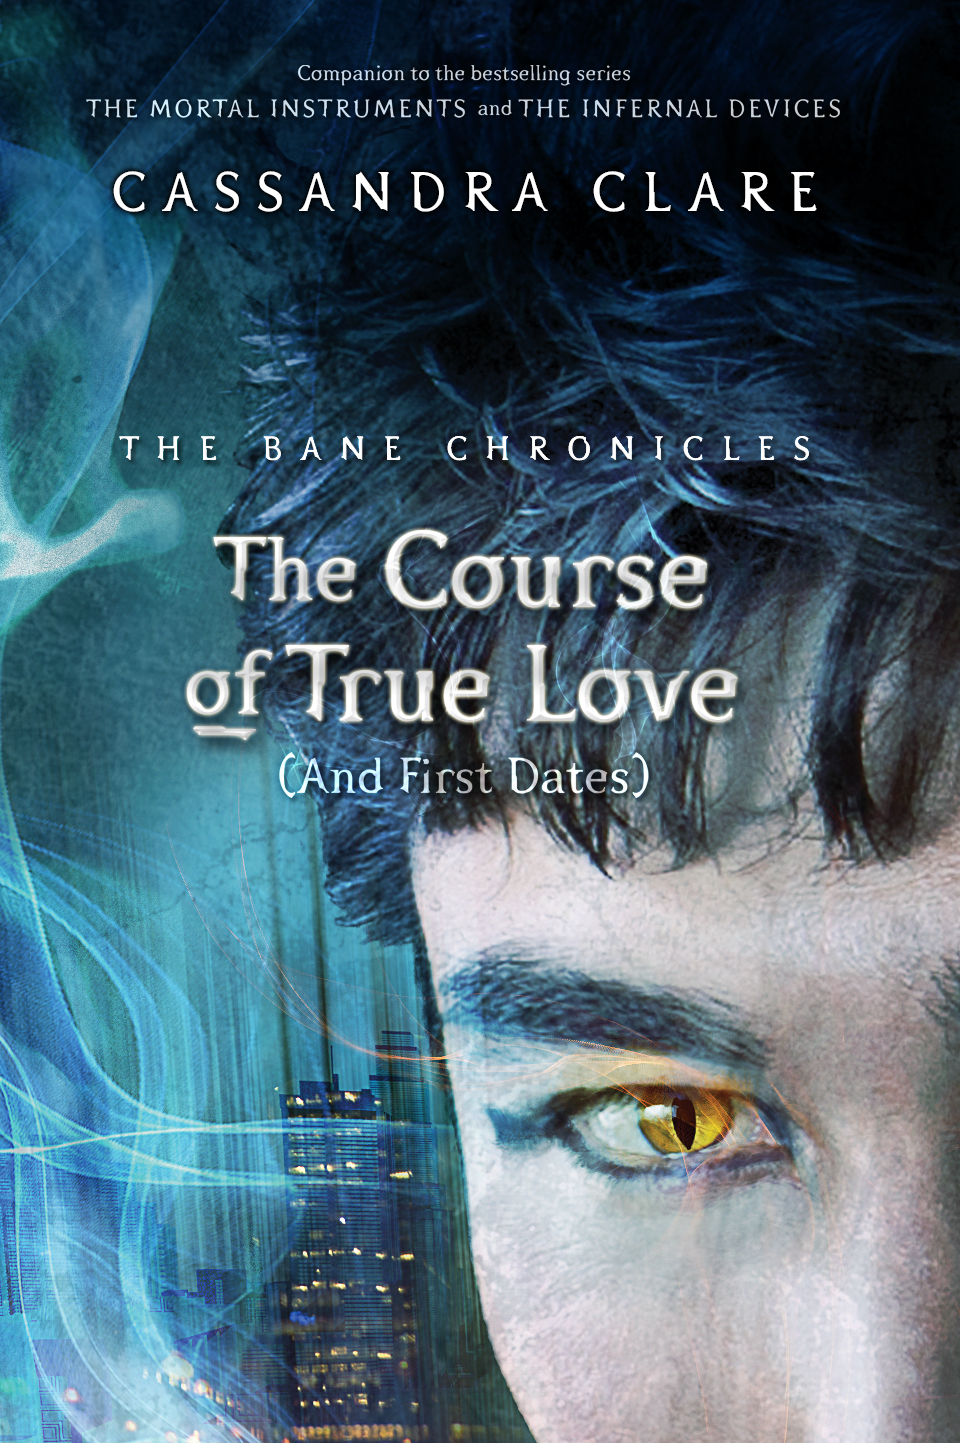 The Course of True Love (and First Dates) by Cassandra Clare